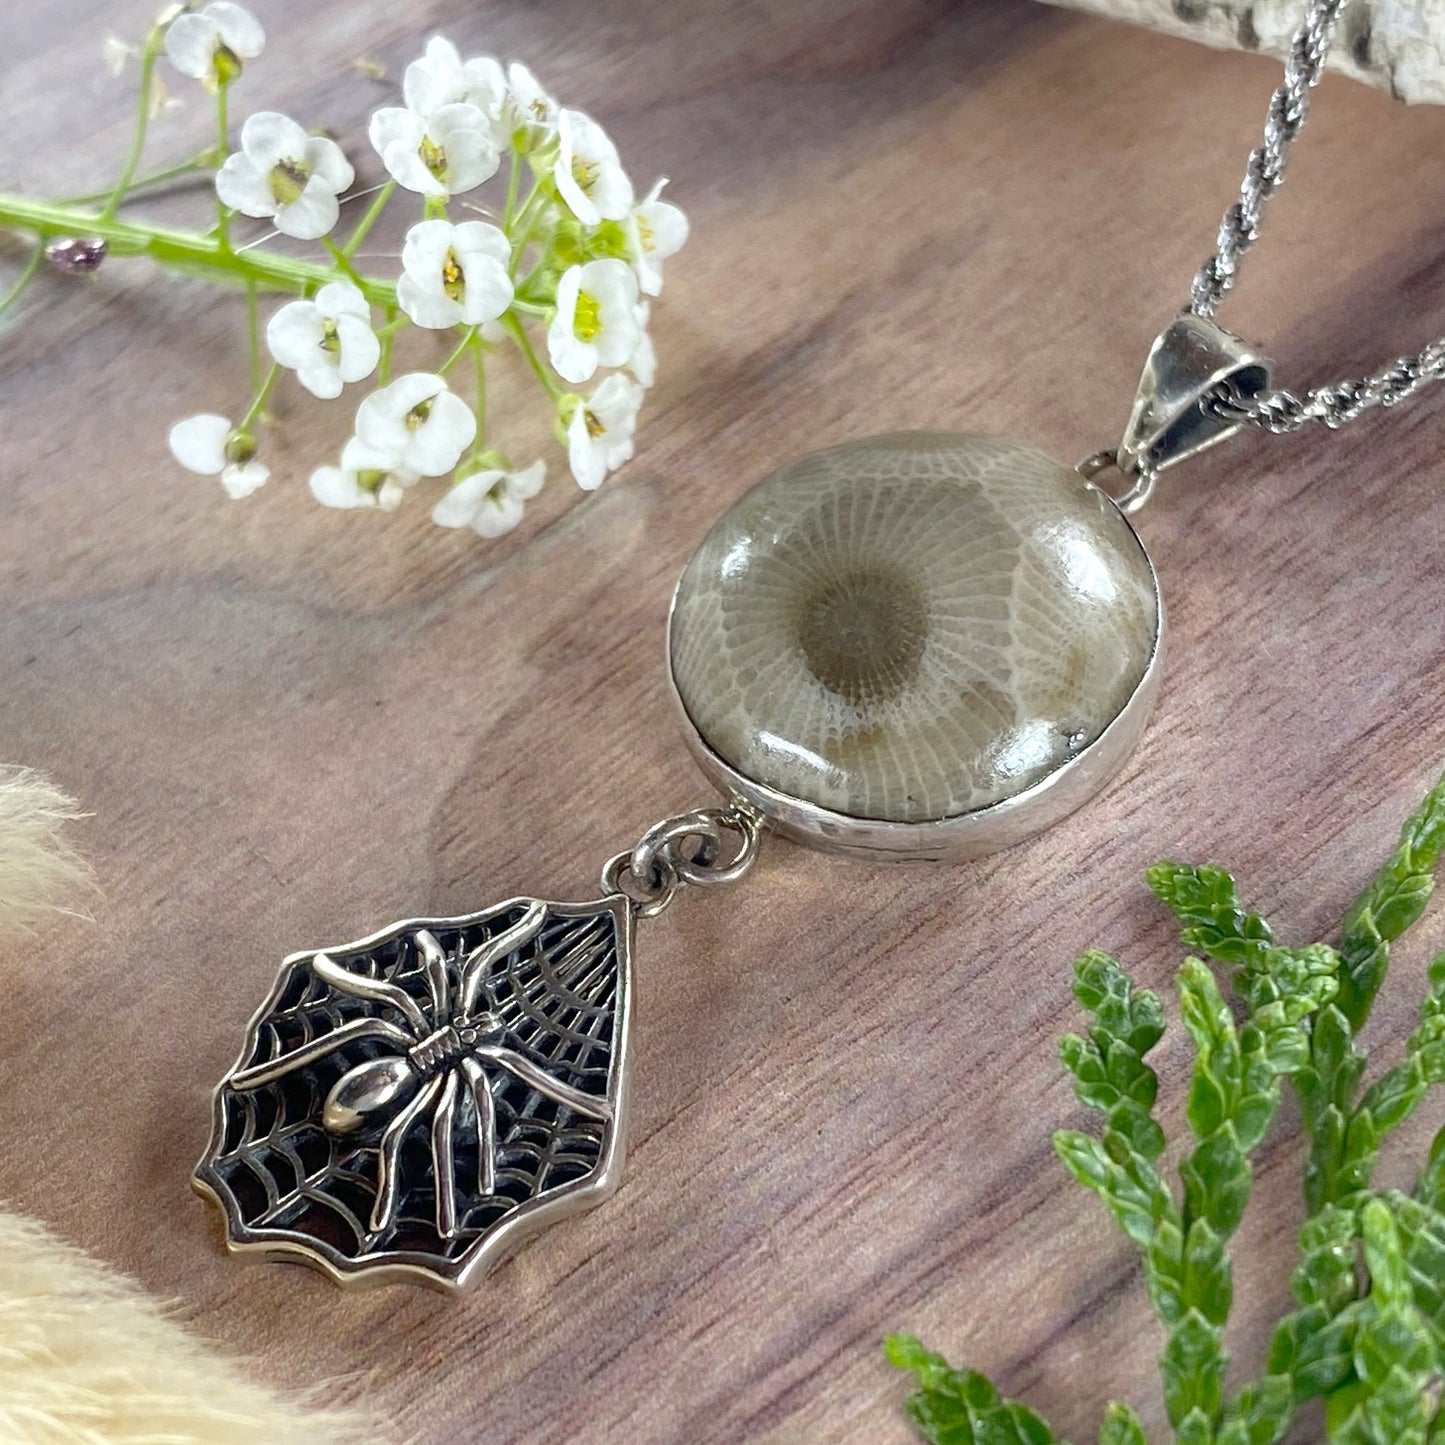 Petoskey Stone with Spider Charm Pendant Necklace Front View III - Stone Treasures by the Lake